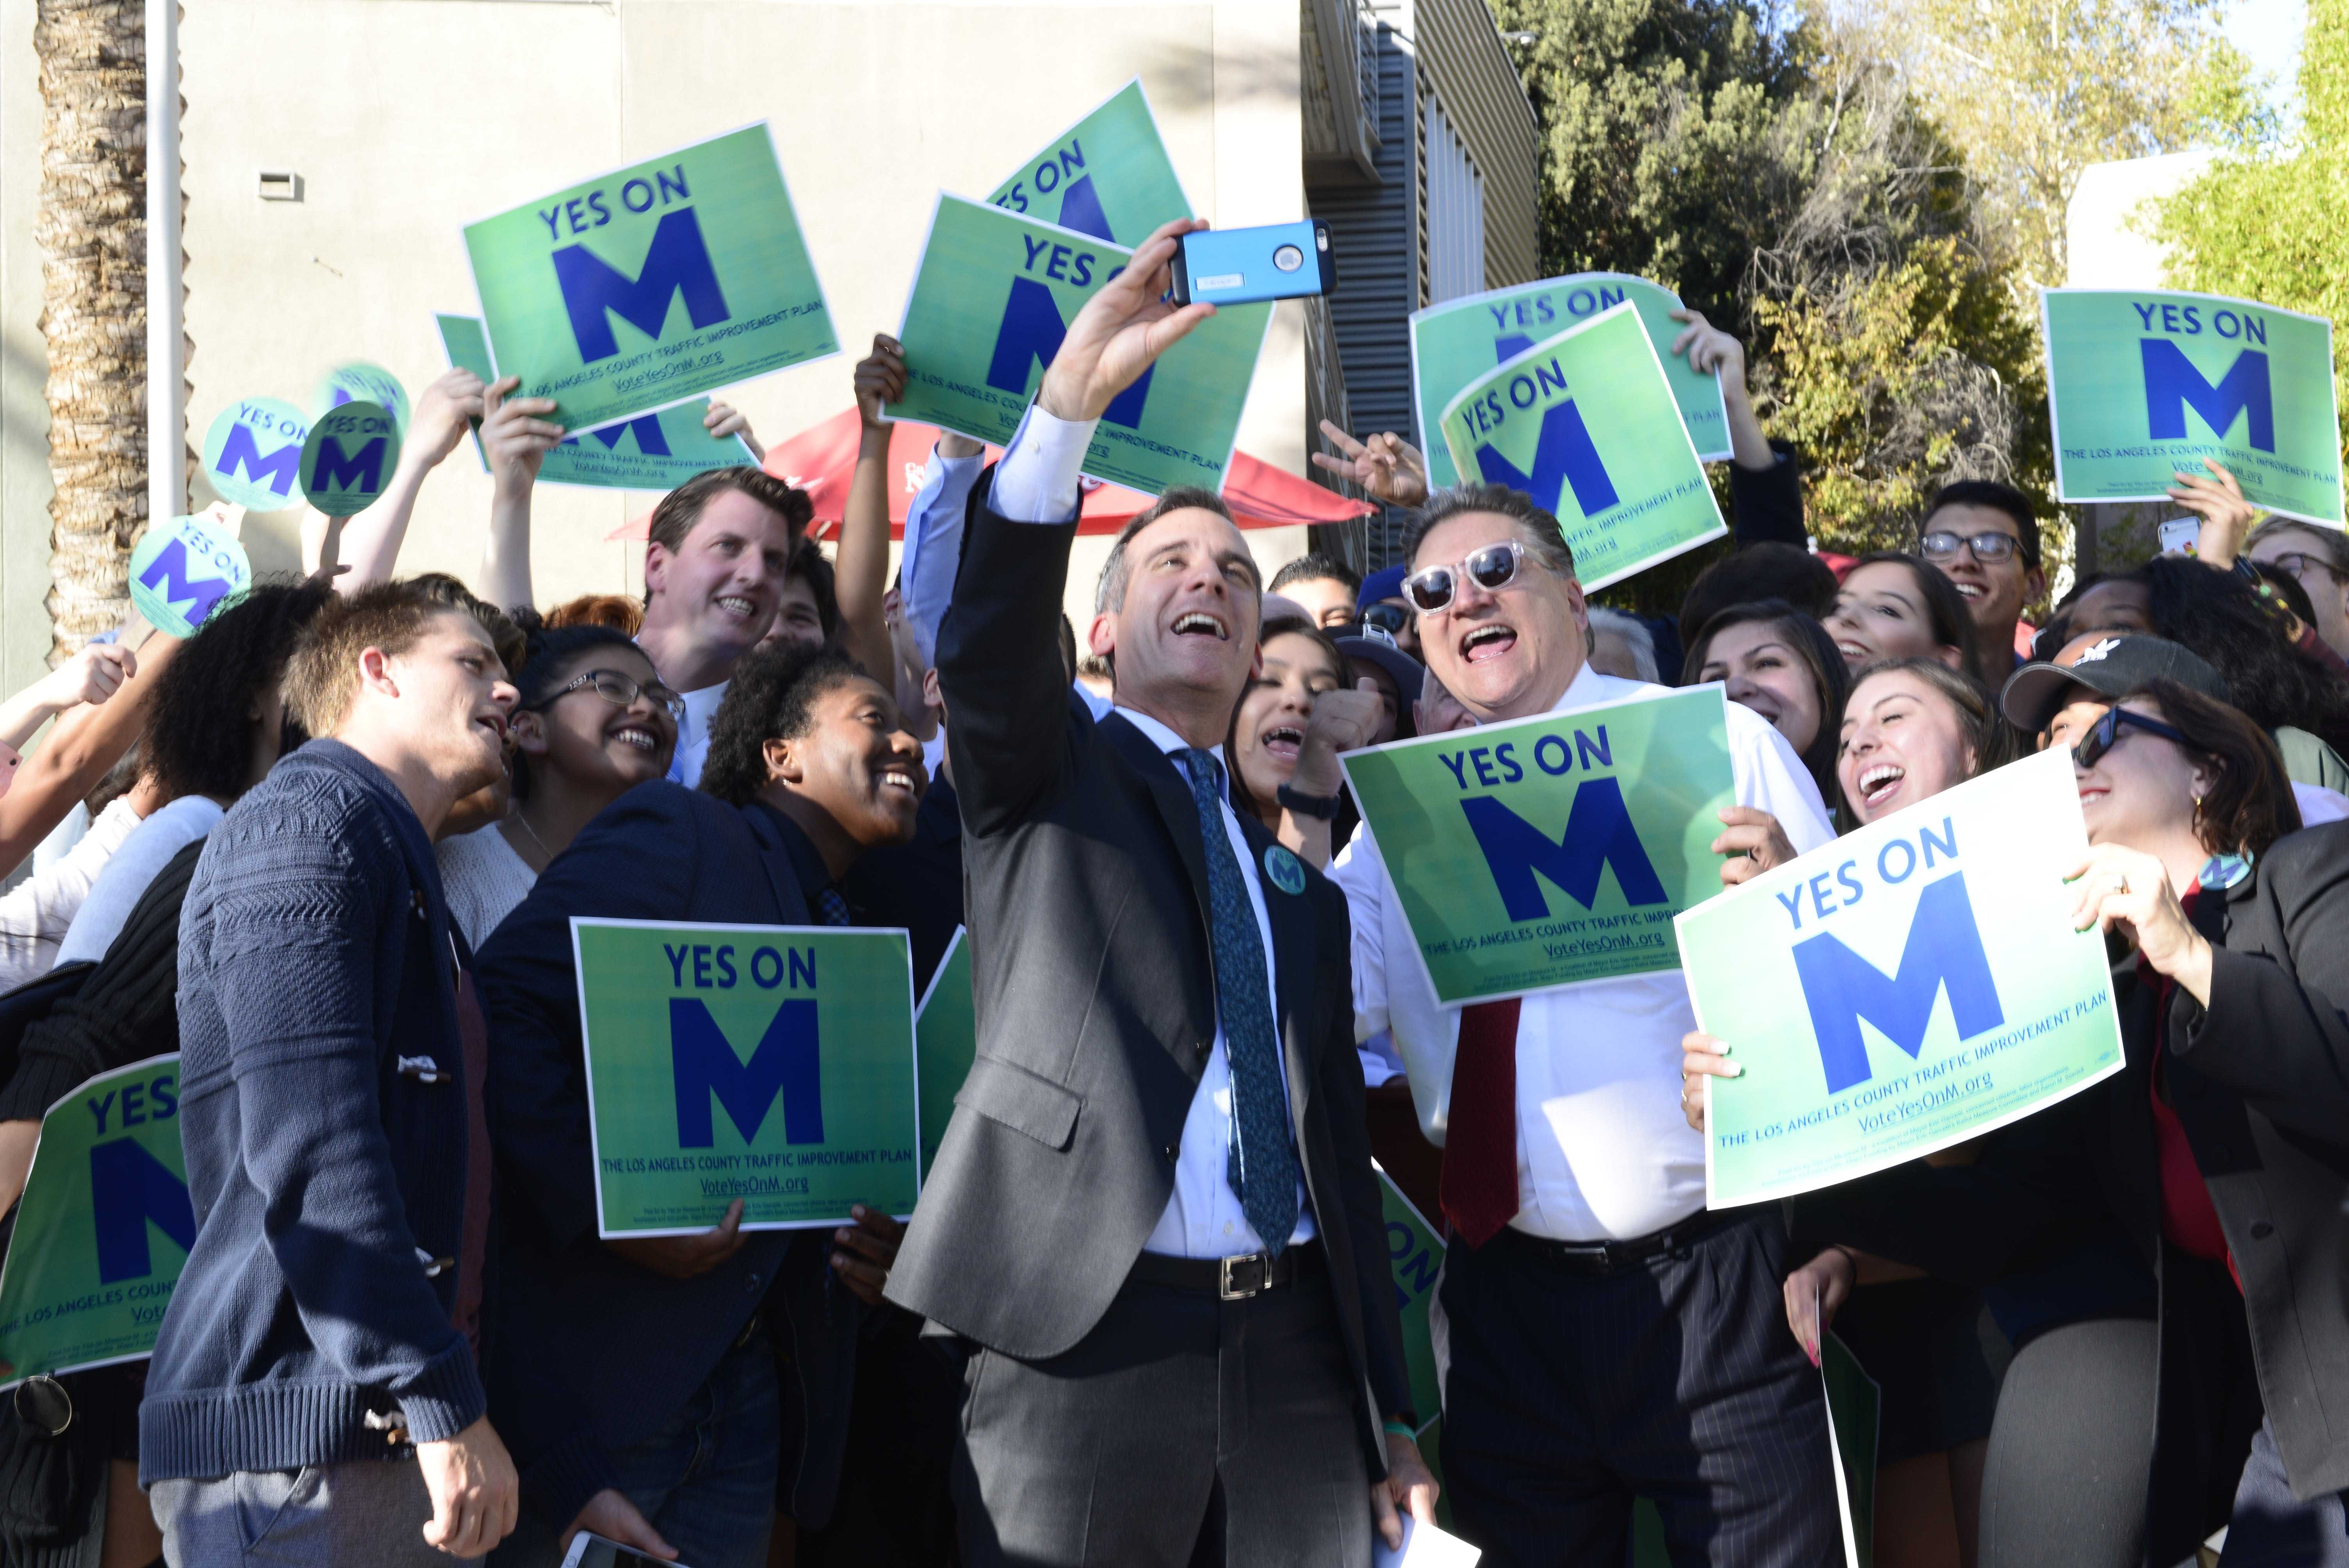 Mayor+shown+taking+picture+with+people+holding+signs+that+read%2C+Yes+on+M